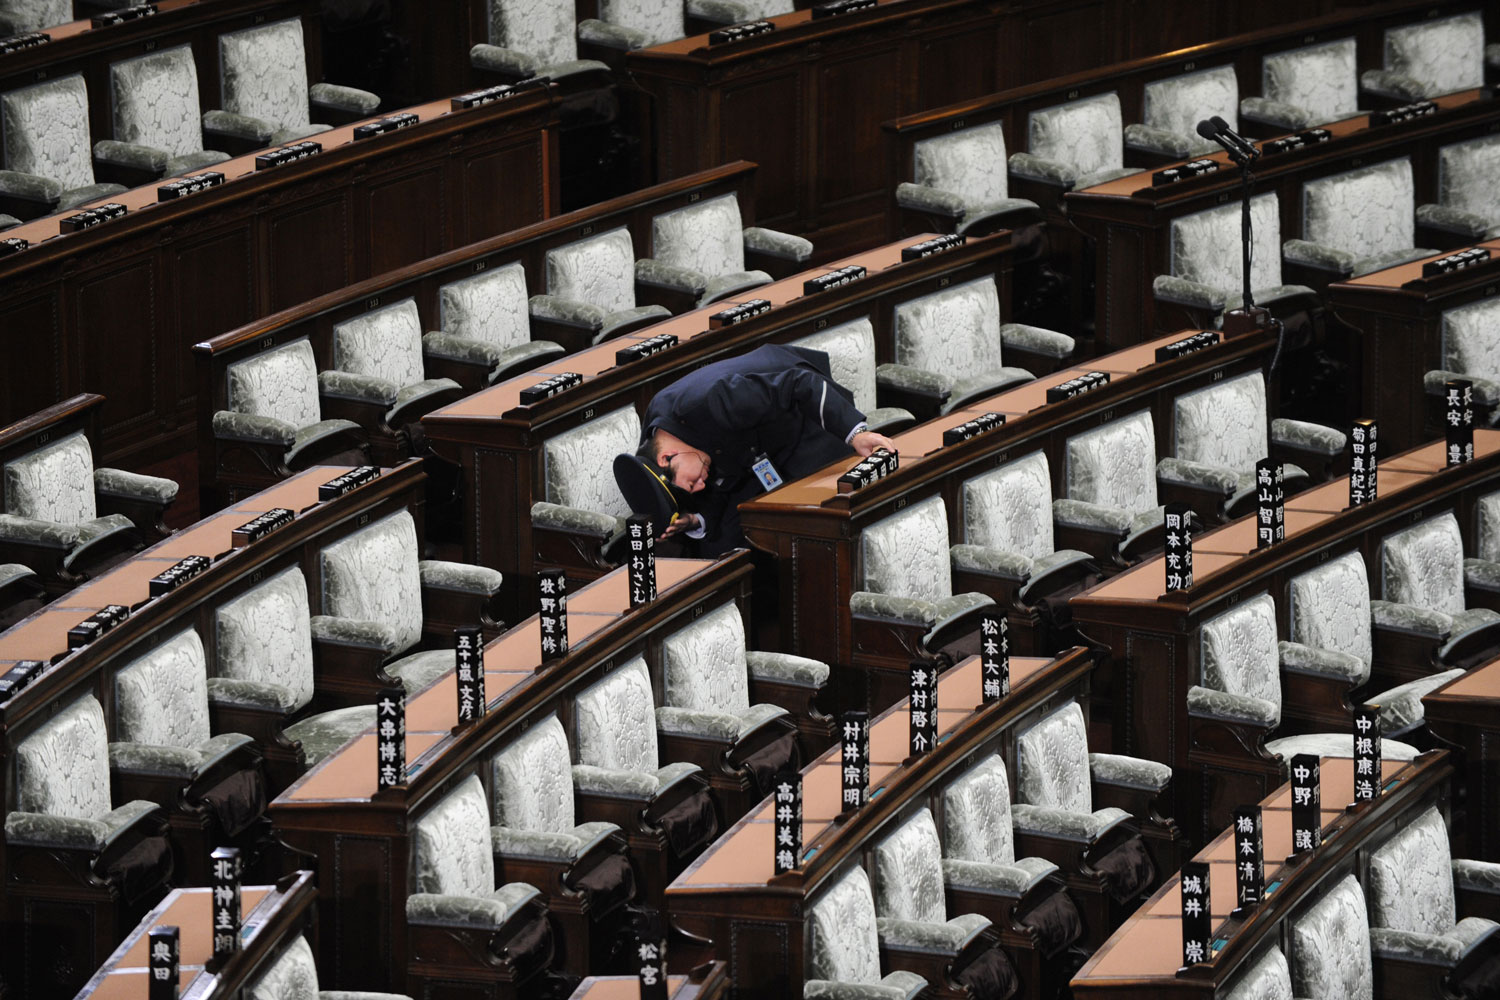 Image: Nov. 16, 2012. A guard checks the vacant plenary session hall of the lower house in Tokyo. Japan's Prime Minister Yoshihiko Noda dissolved the lower house of parliament for an election next month, in a political gamble widely expected to strip his center-left party of power.